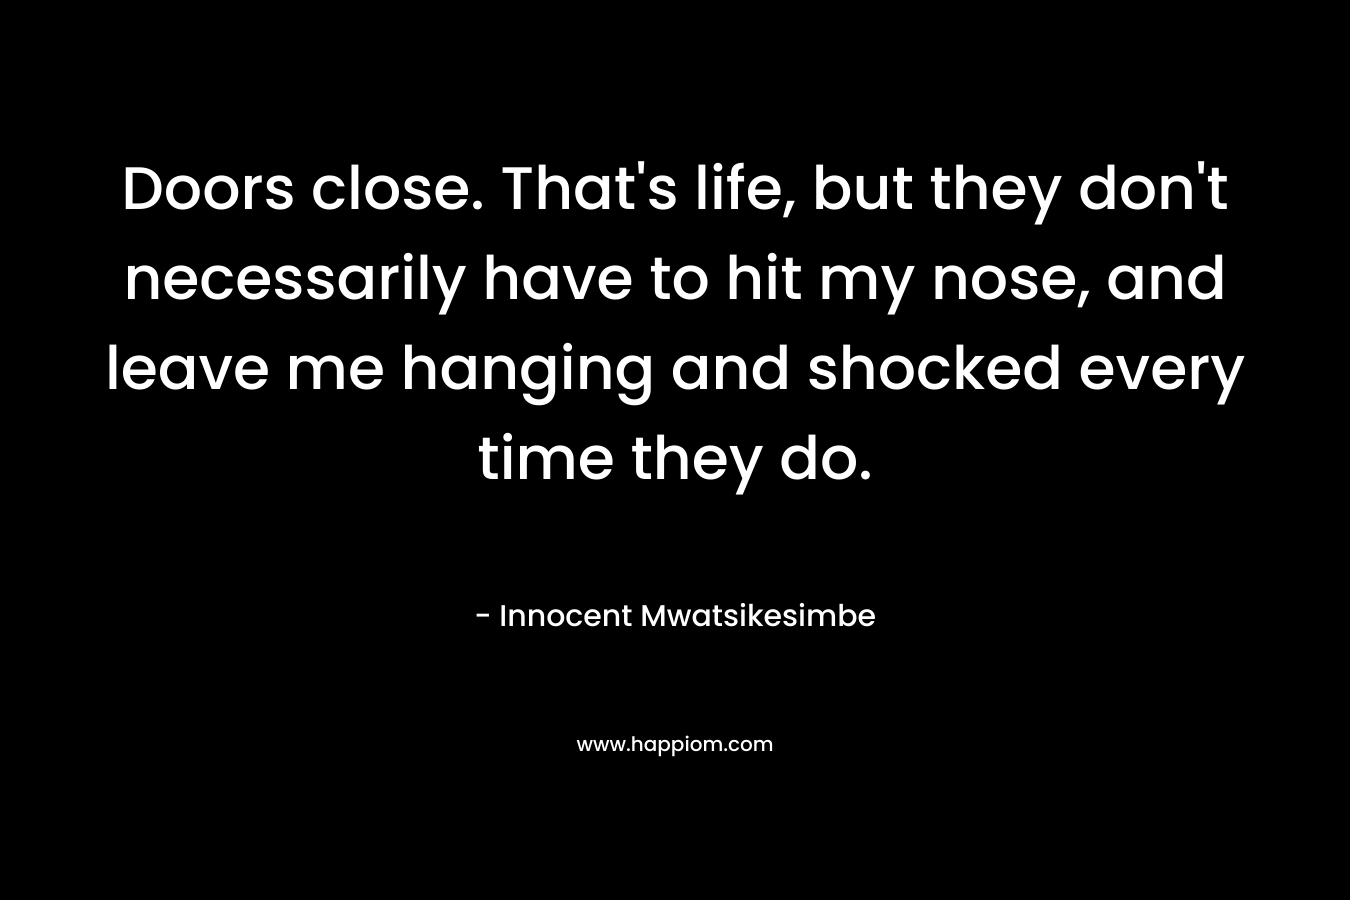 Doors close. That's life, but they don't necessarily have to hit my nose, and leave me hanging and shocked every time they do.